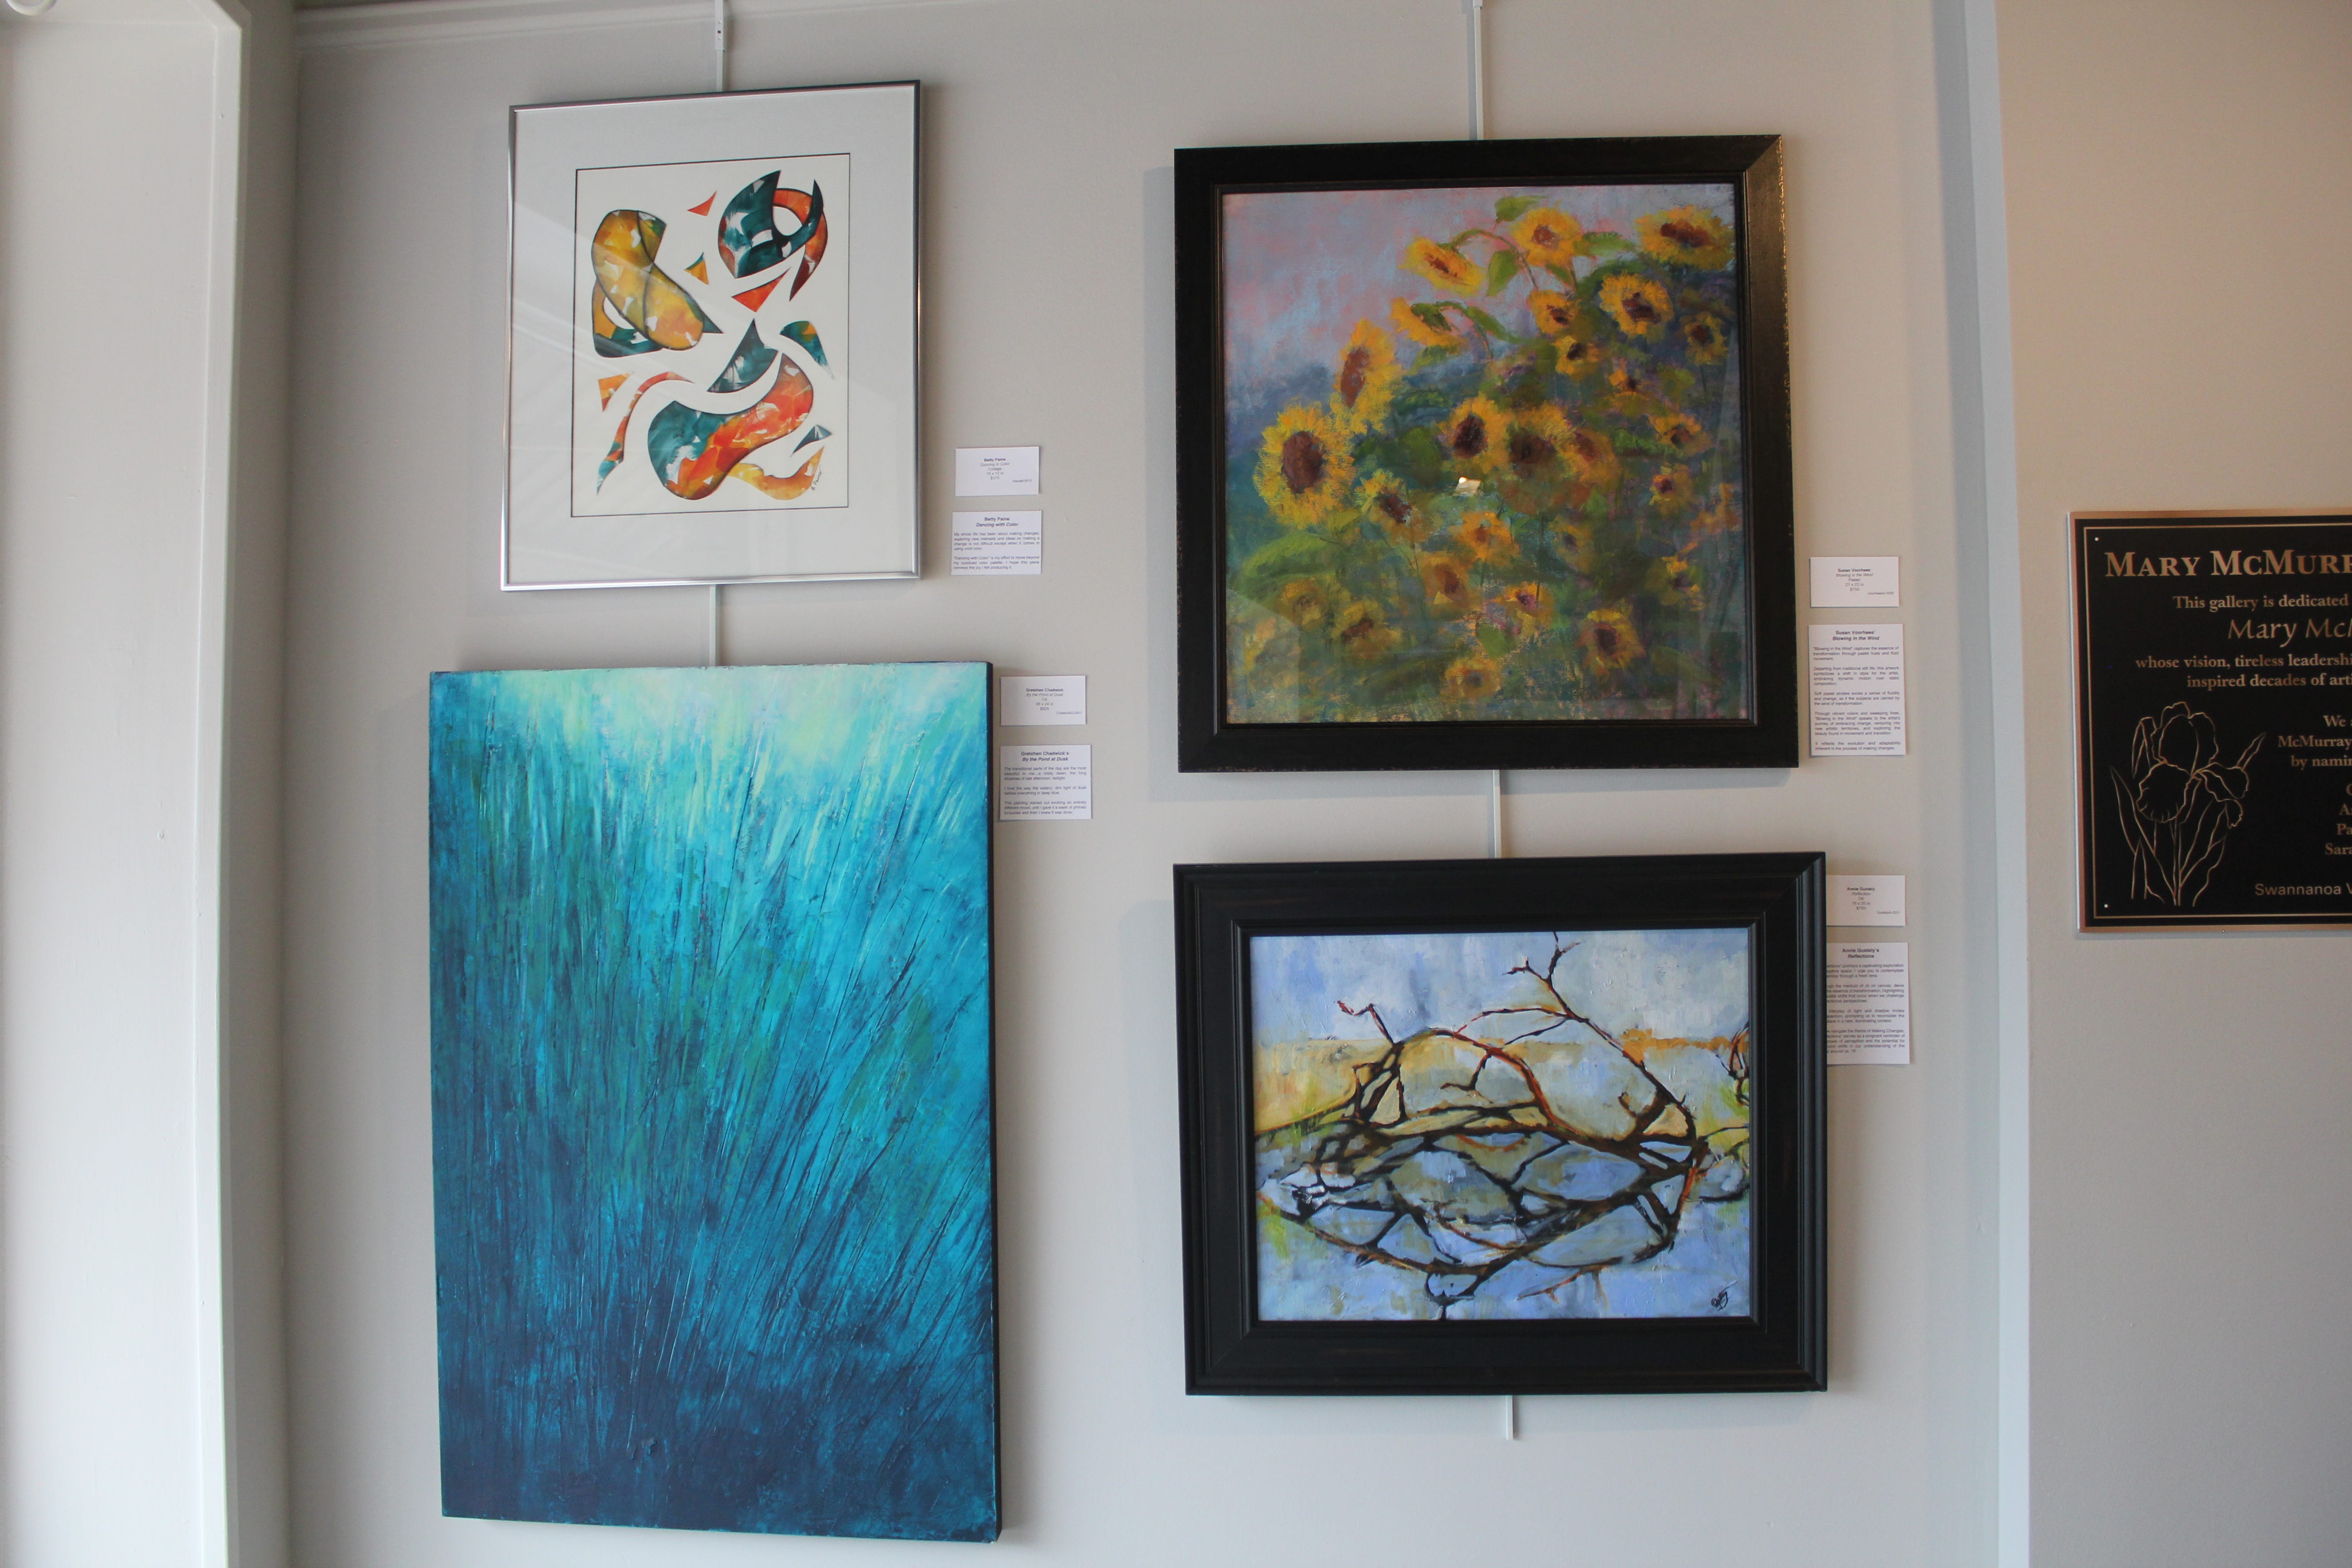 Of the Swannanoa Valley Art League's 145 members, about half have work displayed at the Red House Gallery.